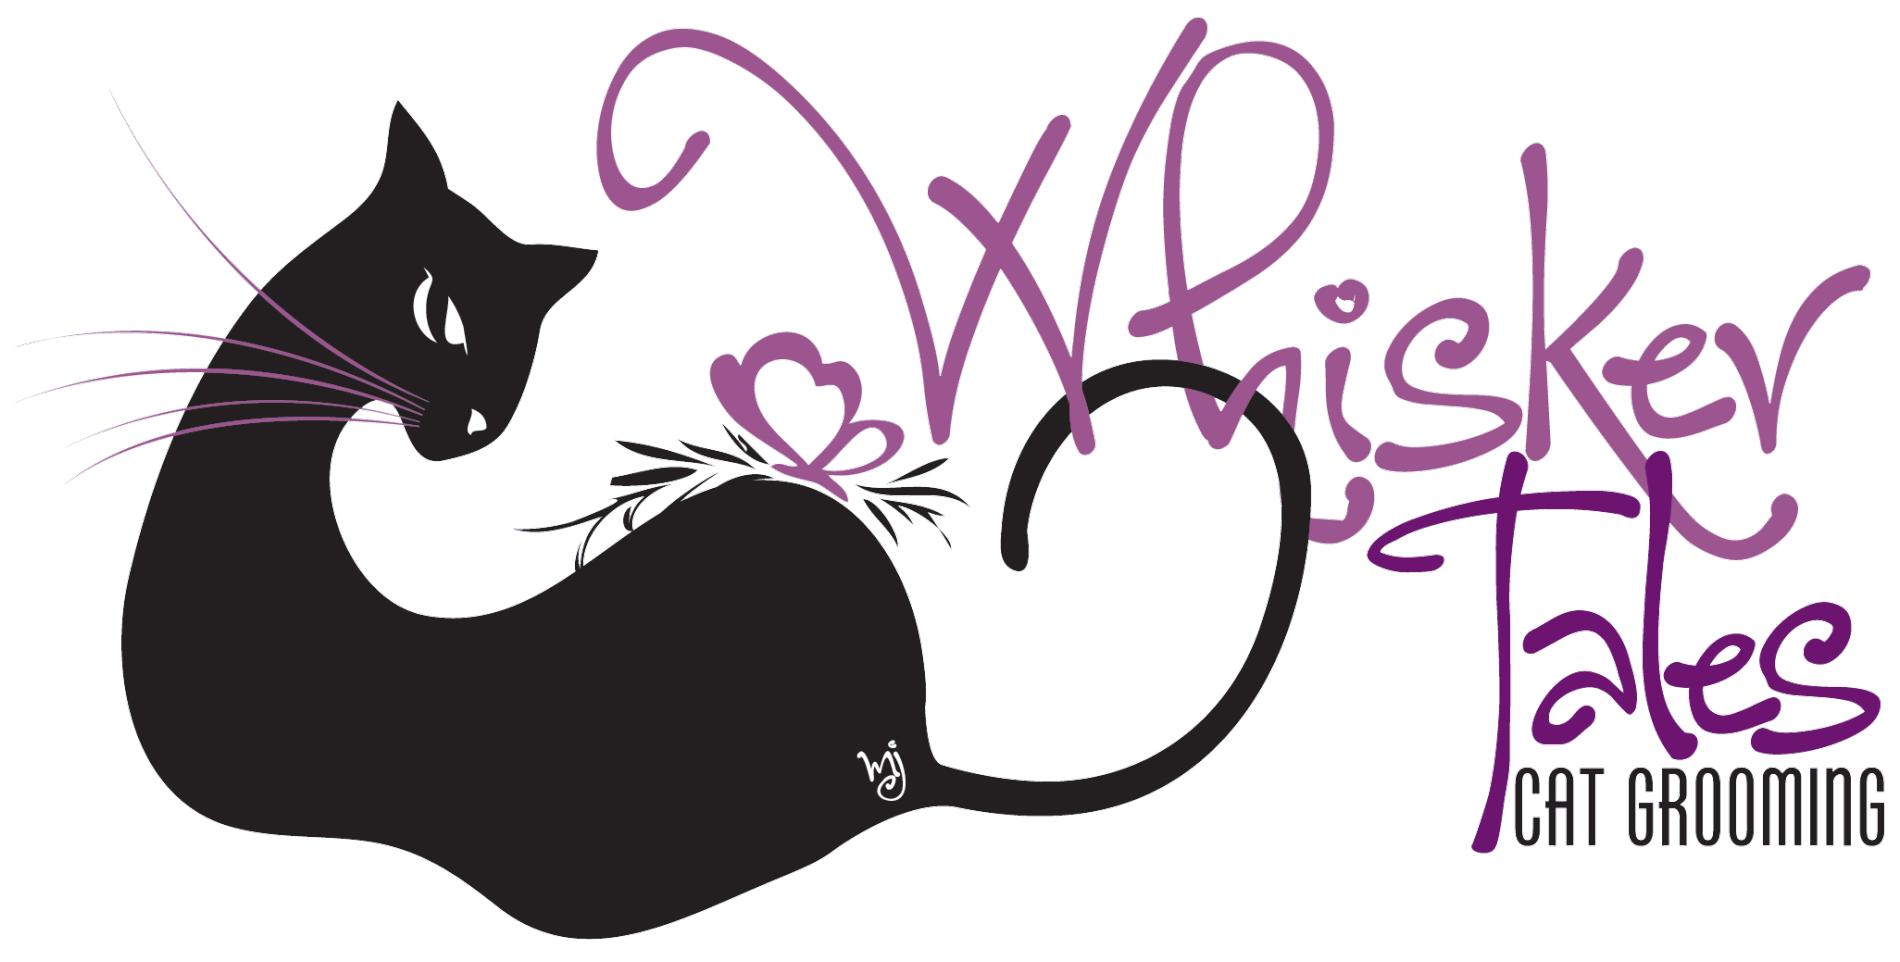 Services pricing whisker tales. Comb clipart cat